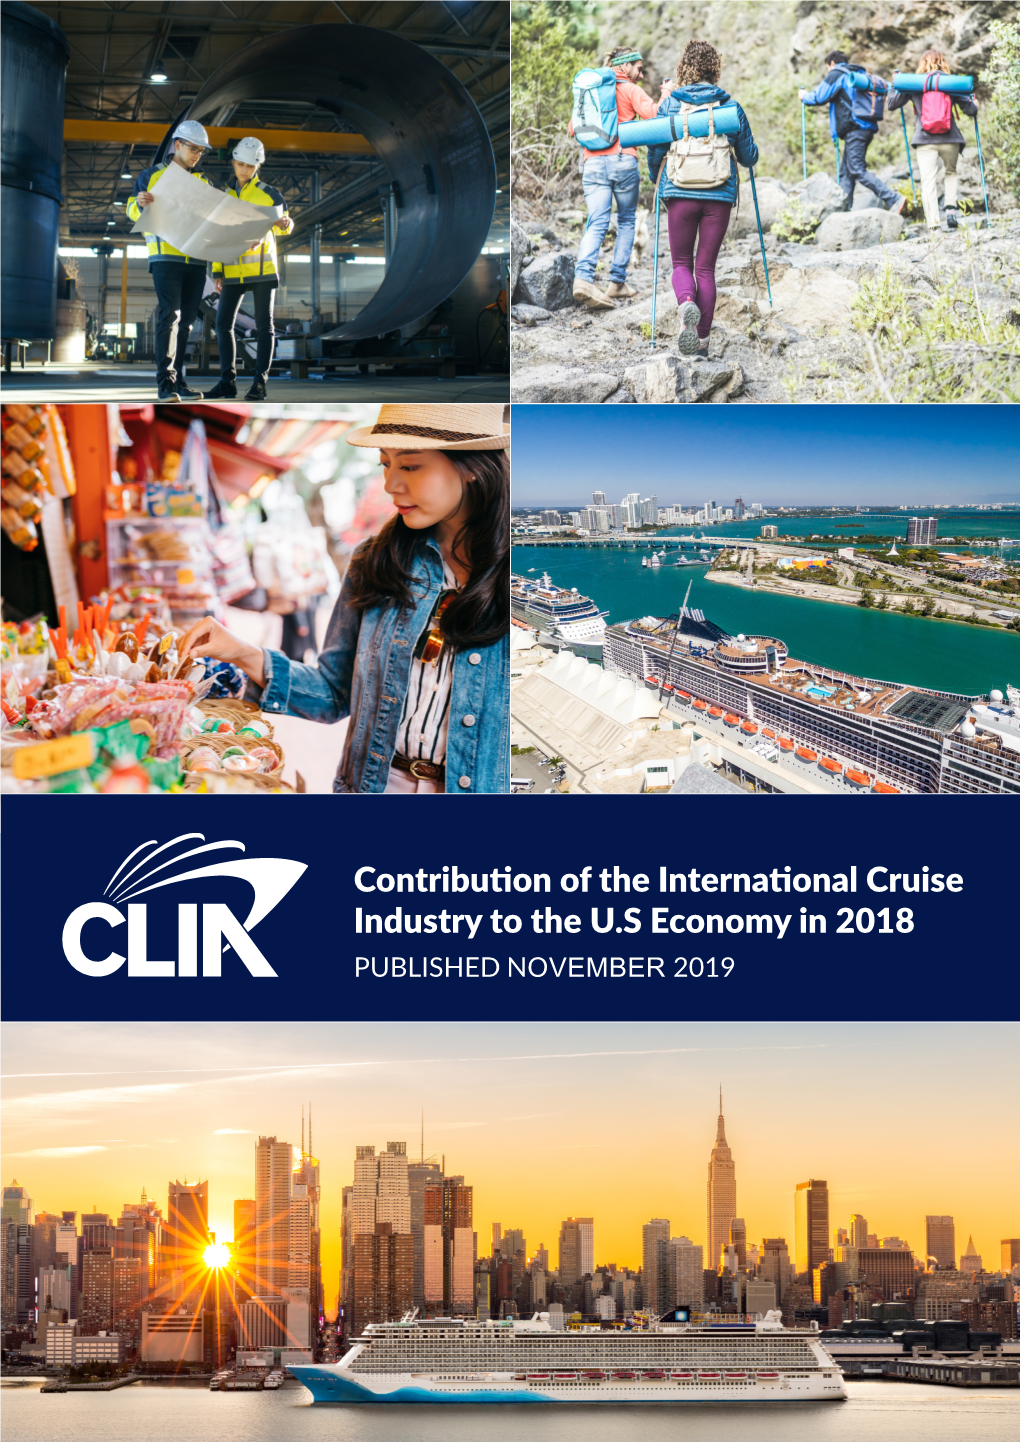 Contribution of the International Cruise Industry to the U.S Economy in 2018 PUBLISHED NOVEMBER 2019 Cruise Lines International Association 2018 U.S